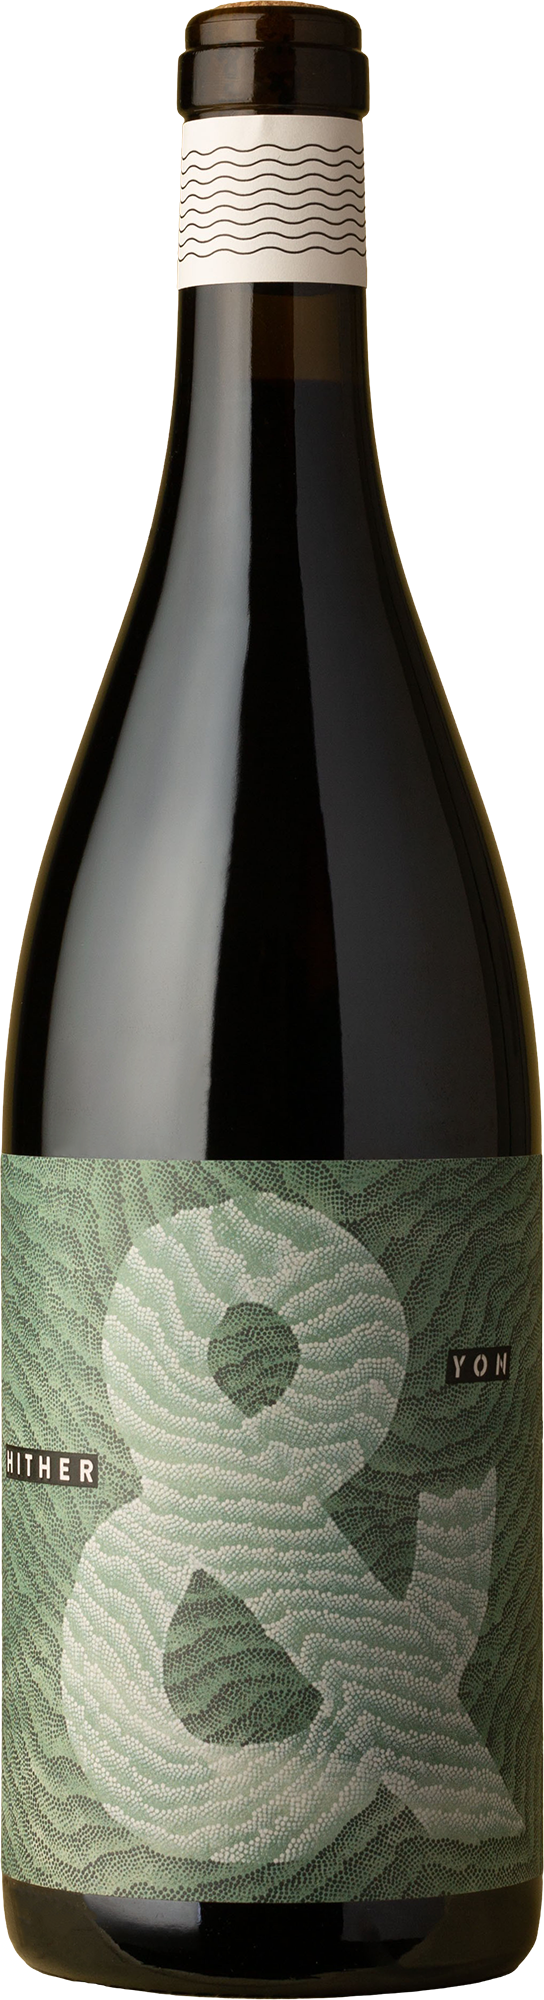 Hither & Yon - Syrah 2021 Red Wine